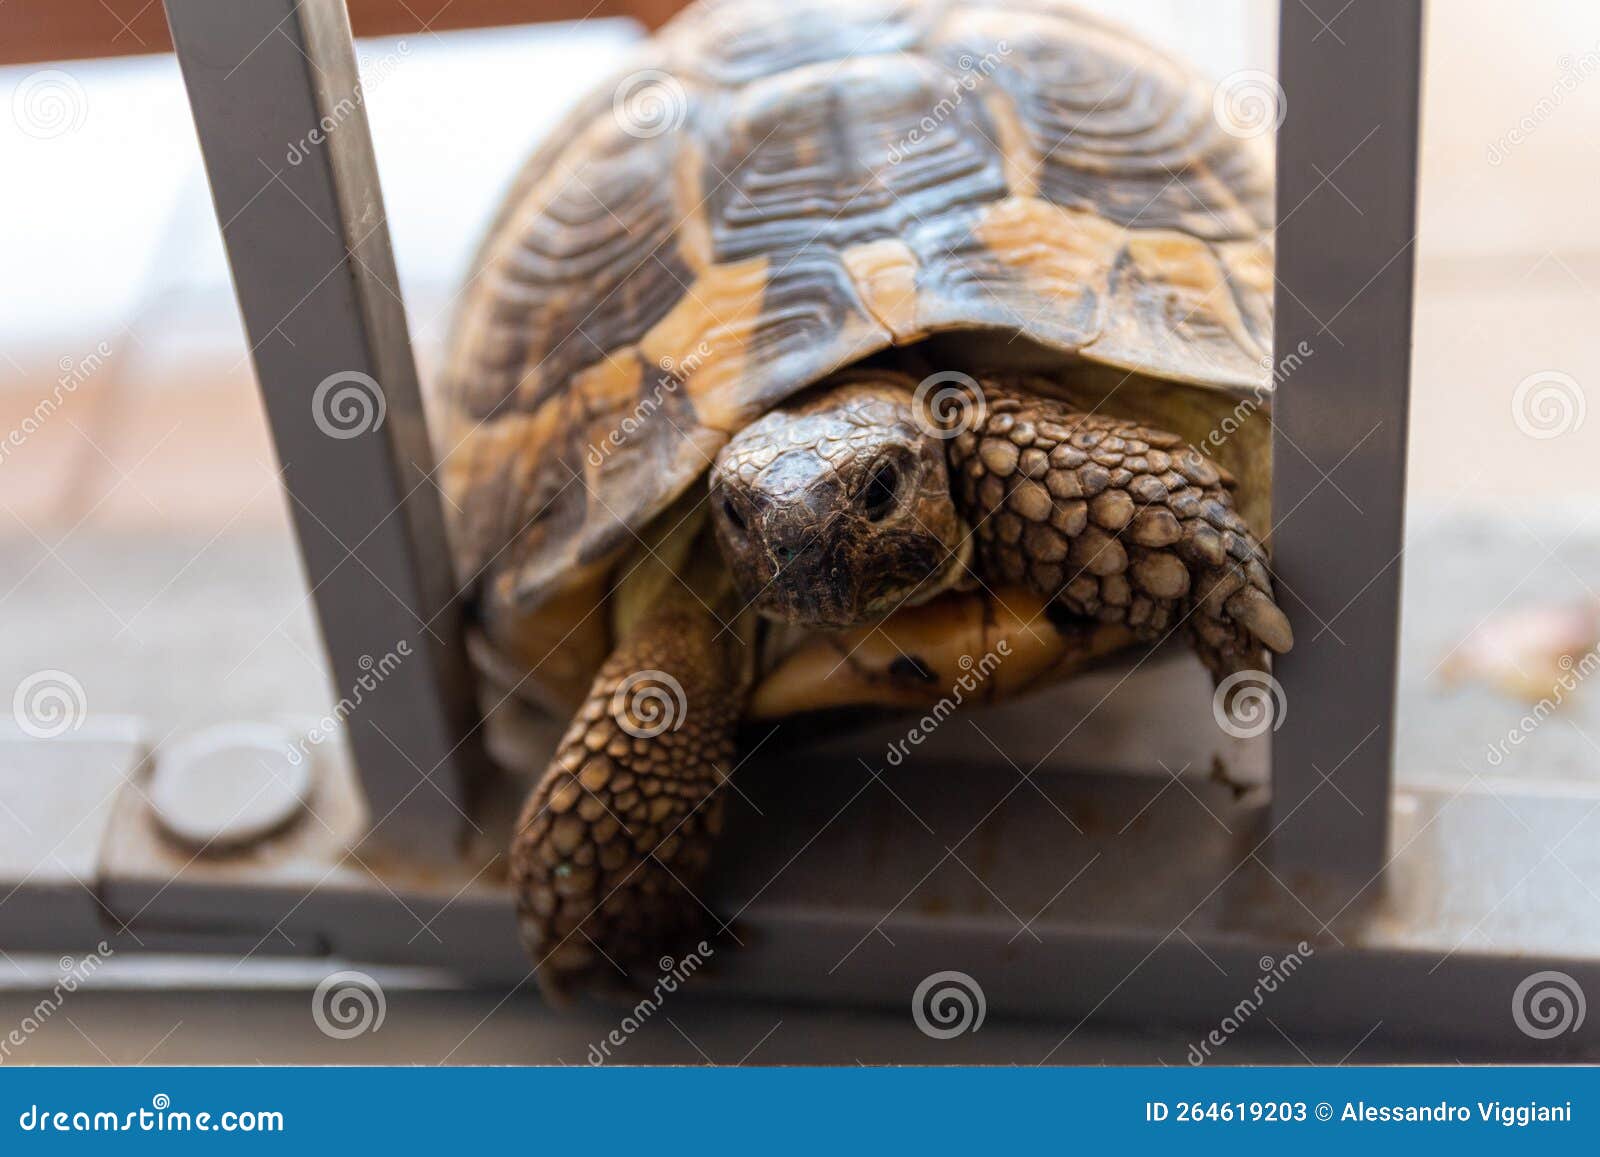 a turtle that wants to enter in the house